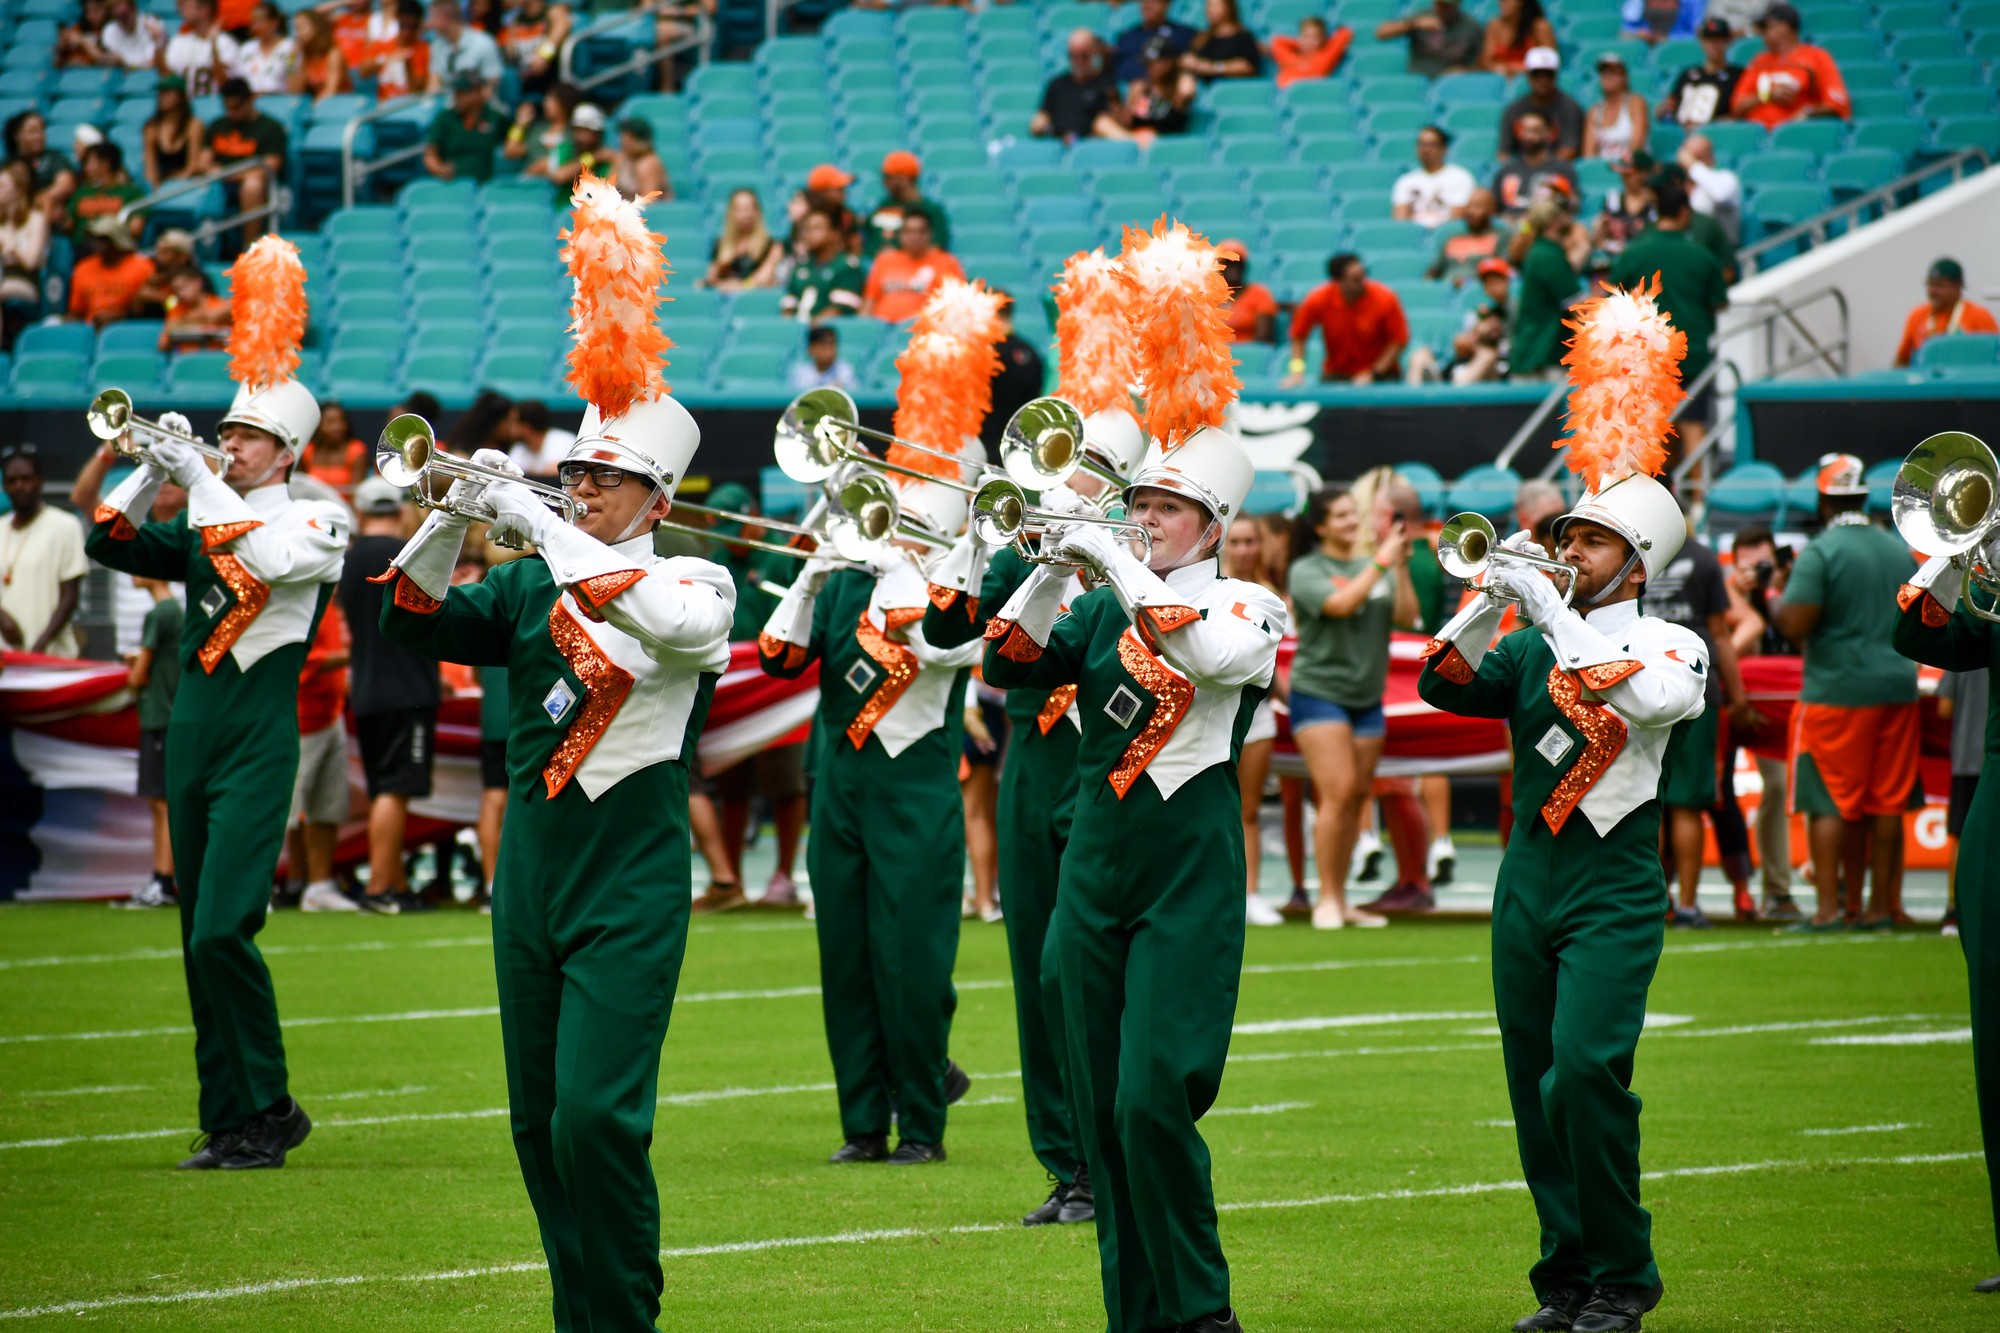 The University of South Florida Inks 3 Game Football Deal with The  University of Alabama — #HMBradio